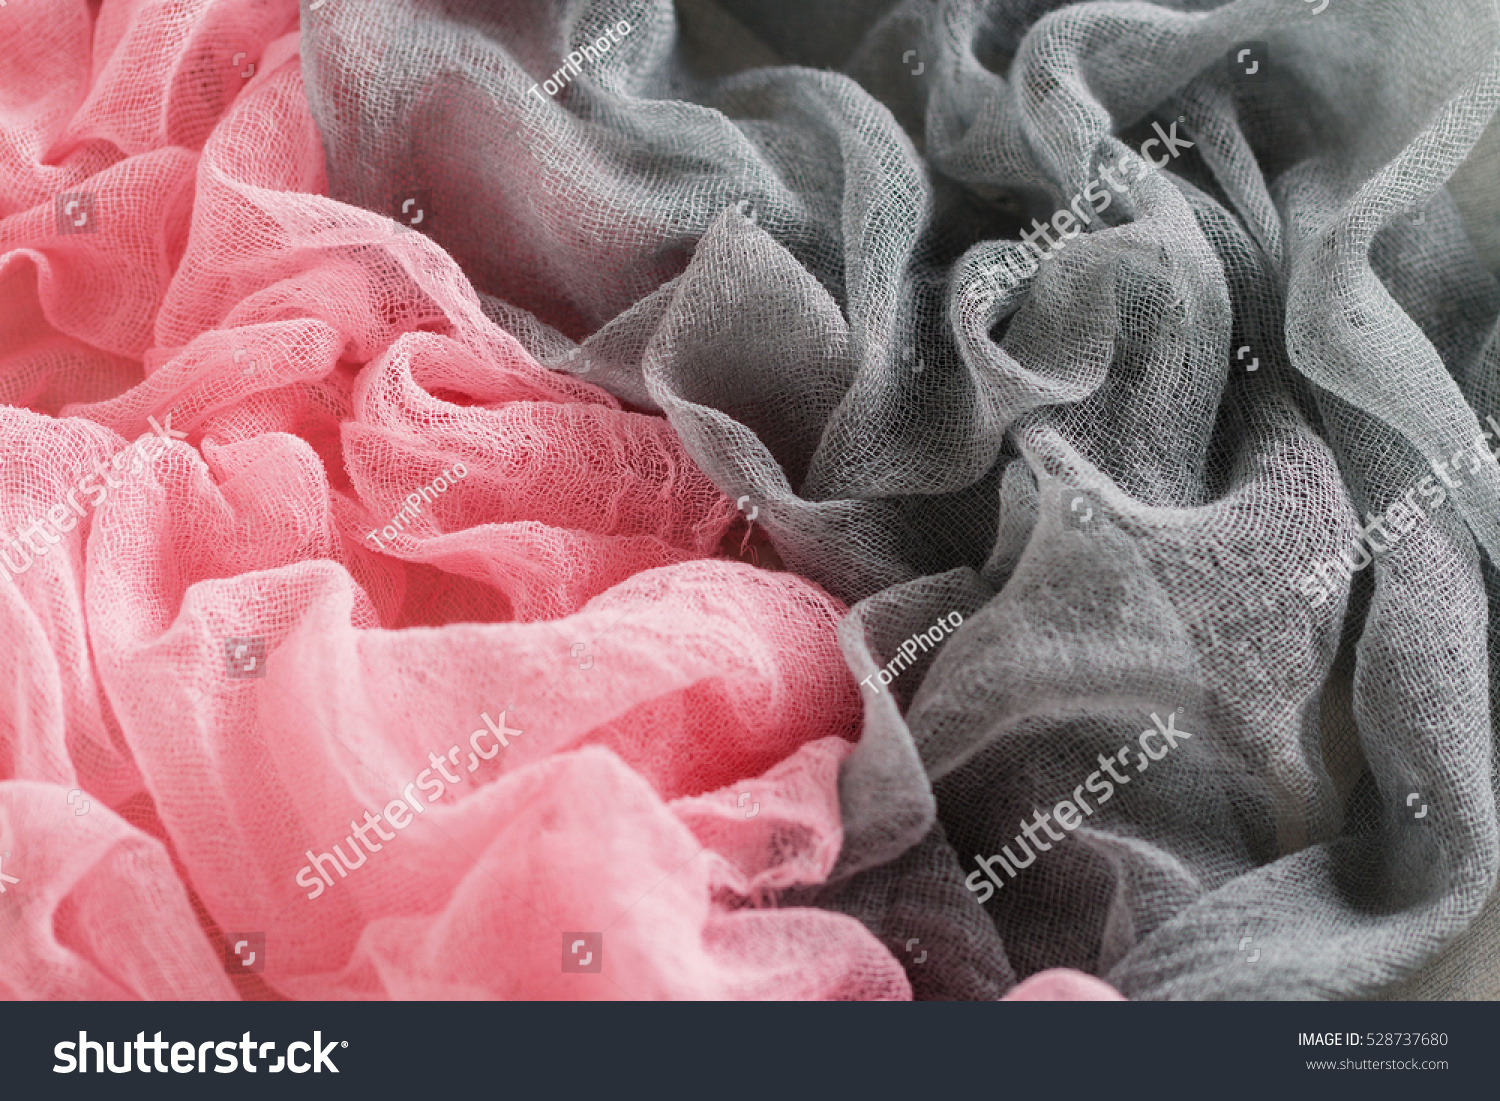 https://www.shutterstock.com/pic-528737680/stock-photo-hand-dyed-gray-and-pink-gauze-fabric-colorful-cloth-texture-background.html?src=hkYMG20-wuGmYBi2N6oGcA-1-43